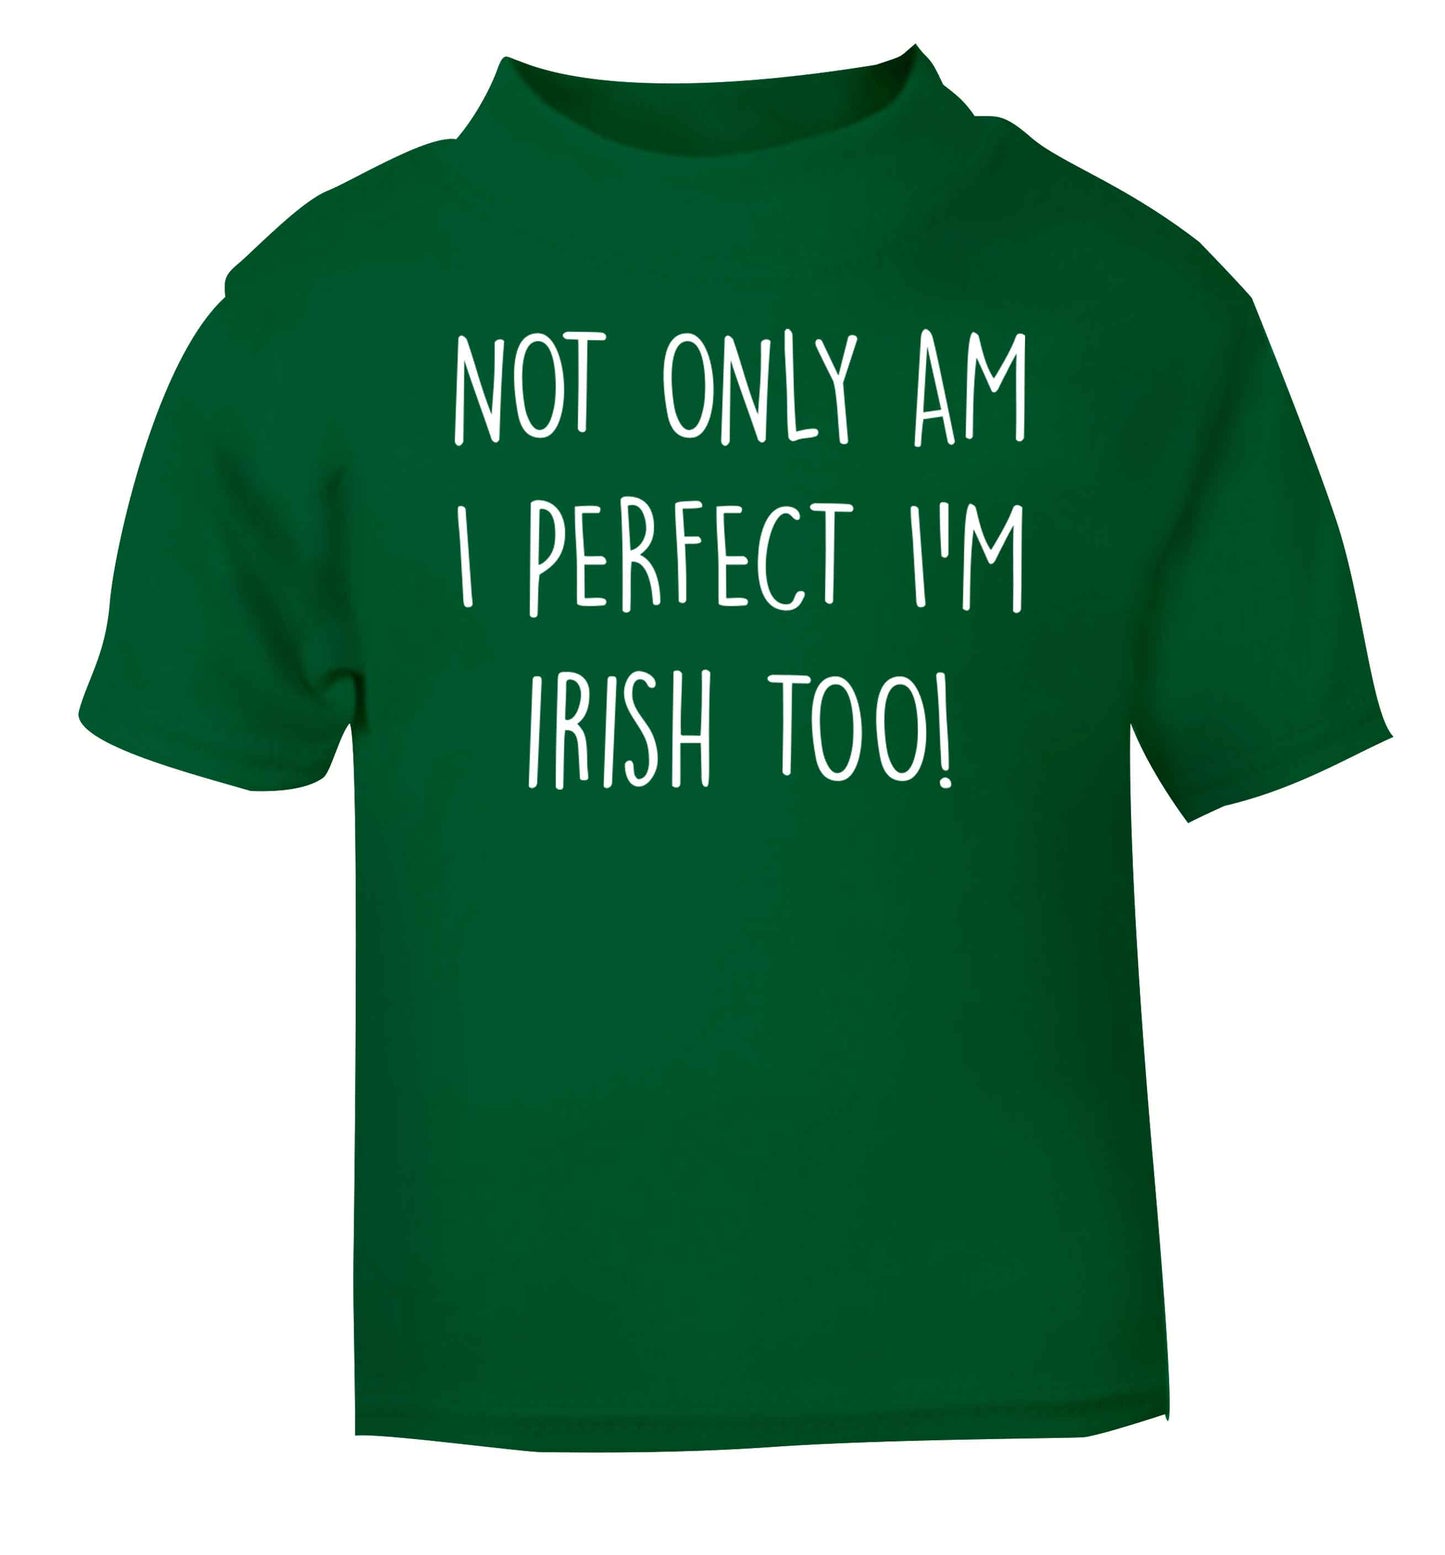 Not only am I perfect I'm Irish too! green baby toddler Tshirt 2 Years